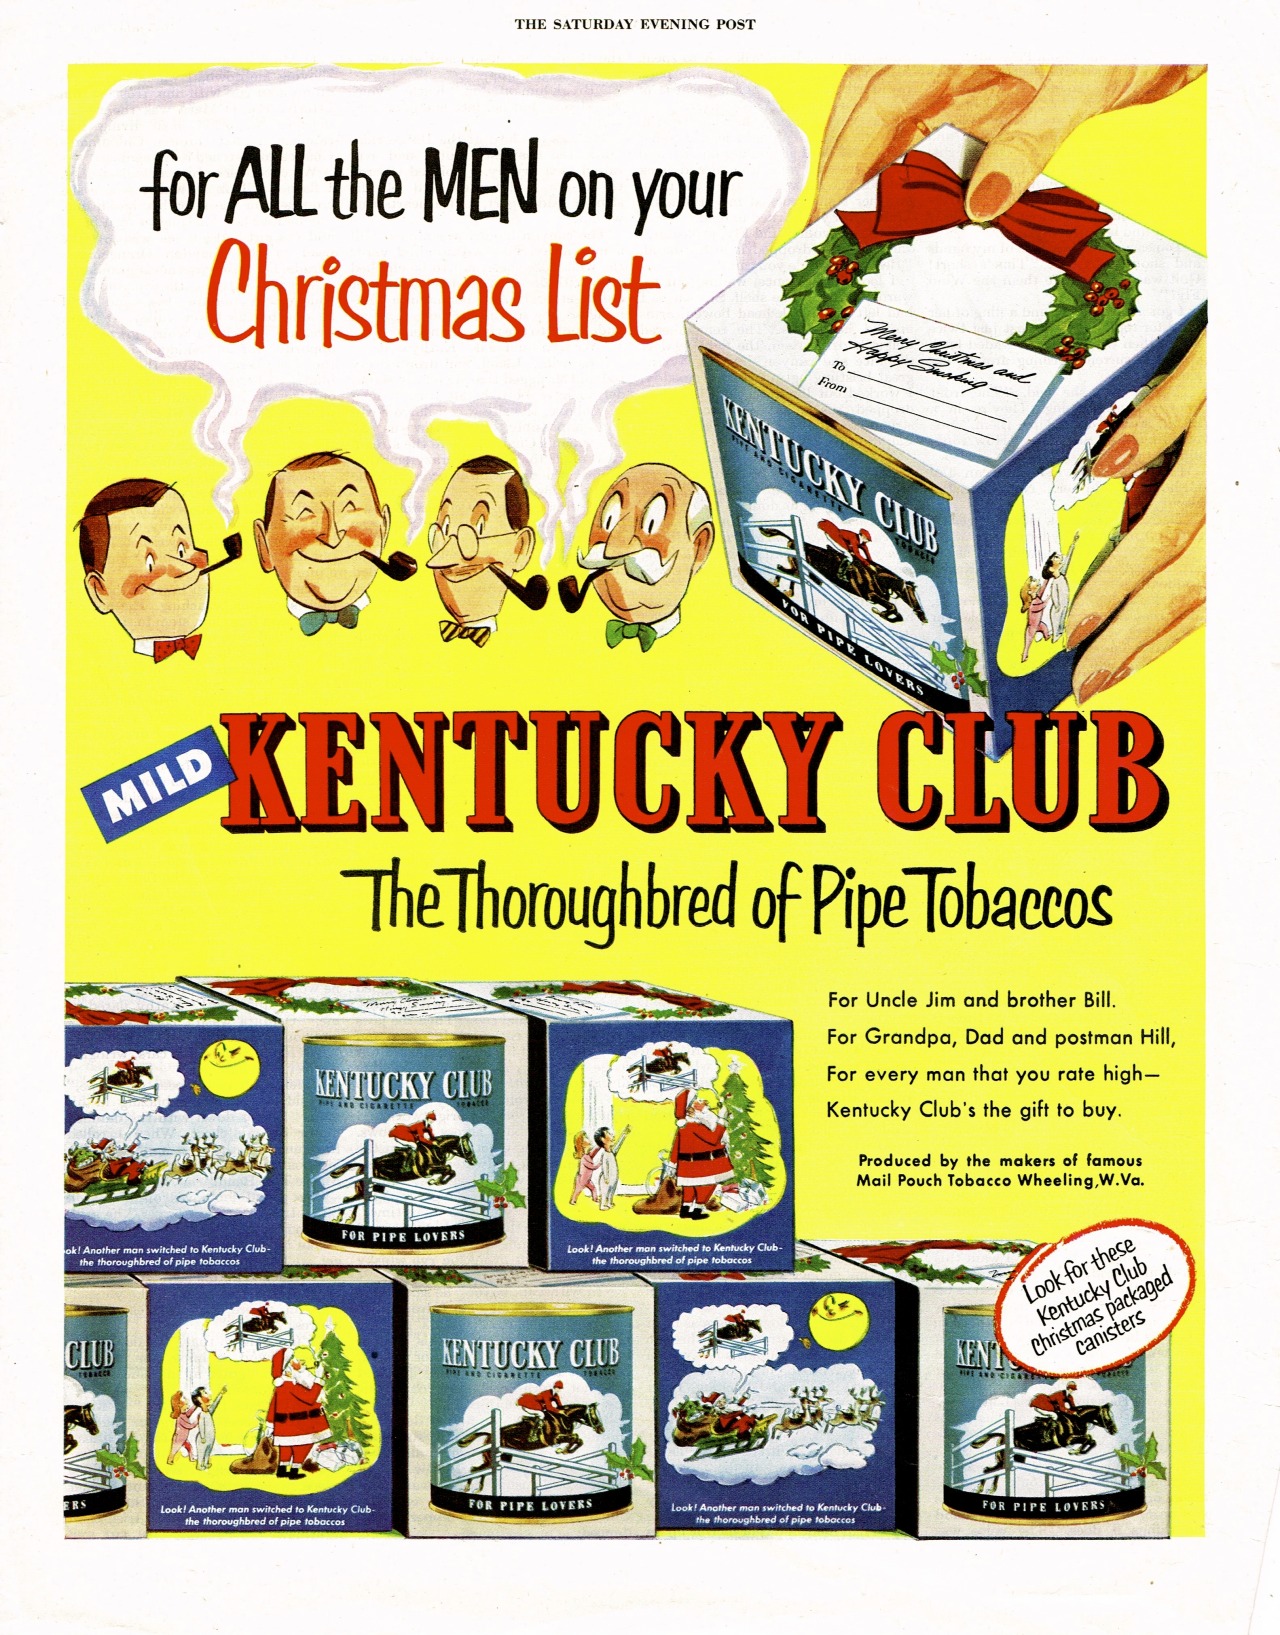 Kentucky Club - published in The Saturday Evening Post - 1953